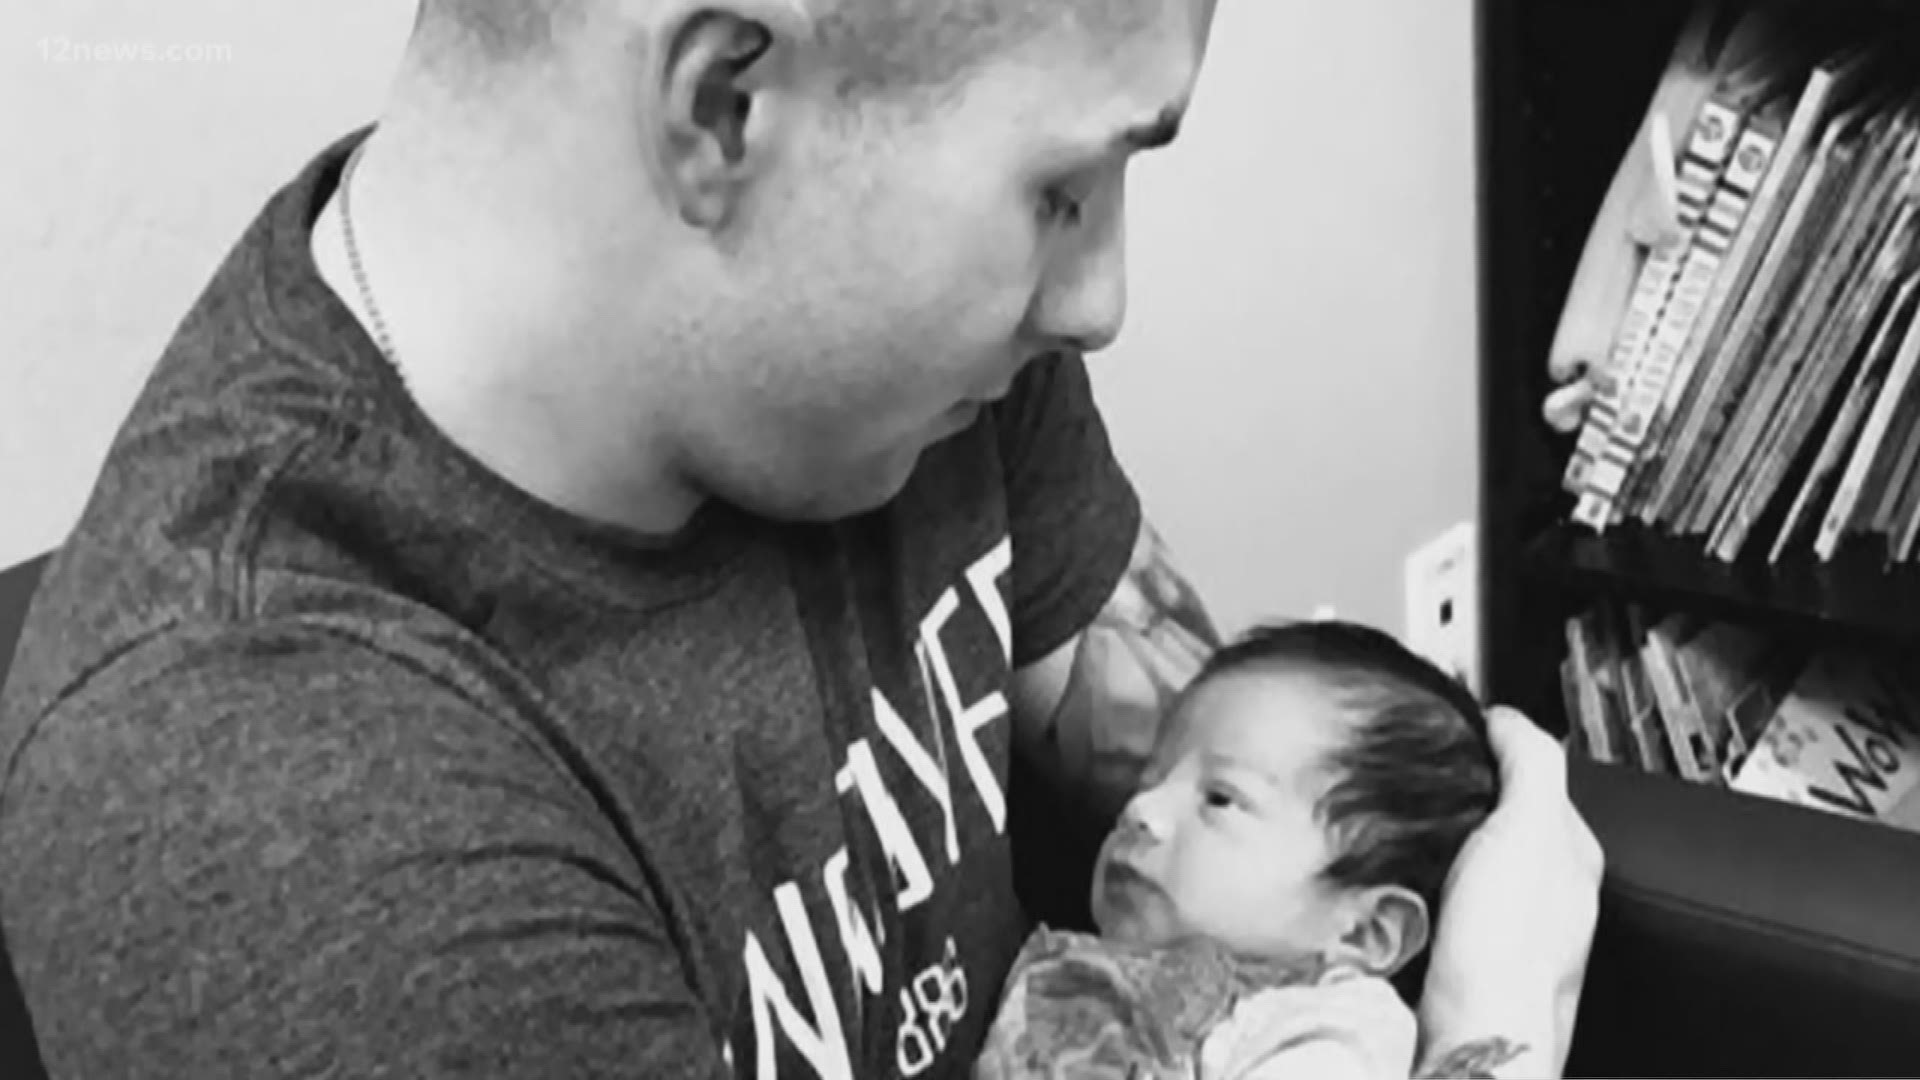 Sgt. Steven Garcia's wife initially told him her baby died during birth, but after endless tears, her alleged web of deceit is unraveling.